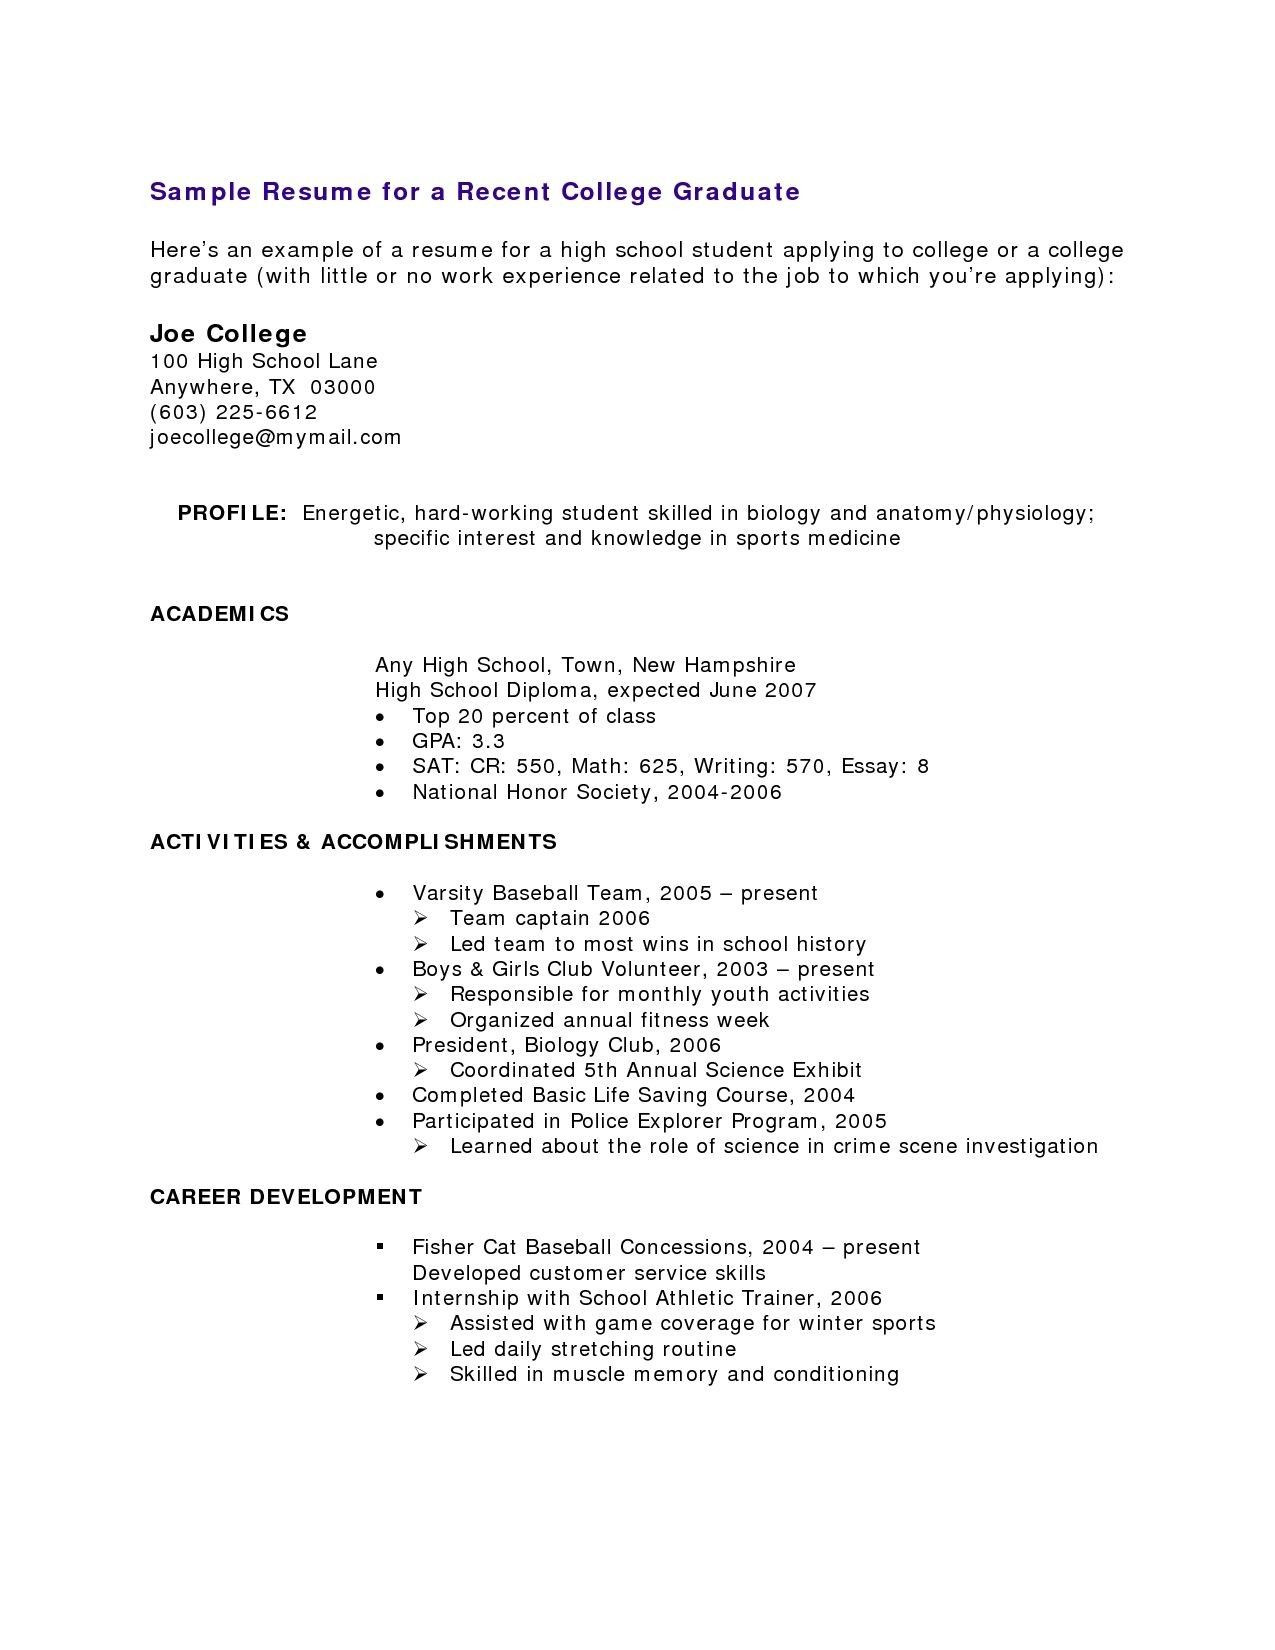 Sample Resume for Highschool Student with No Work Experience High School Student Resume with No Work Experience Resume High …